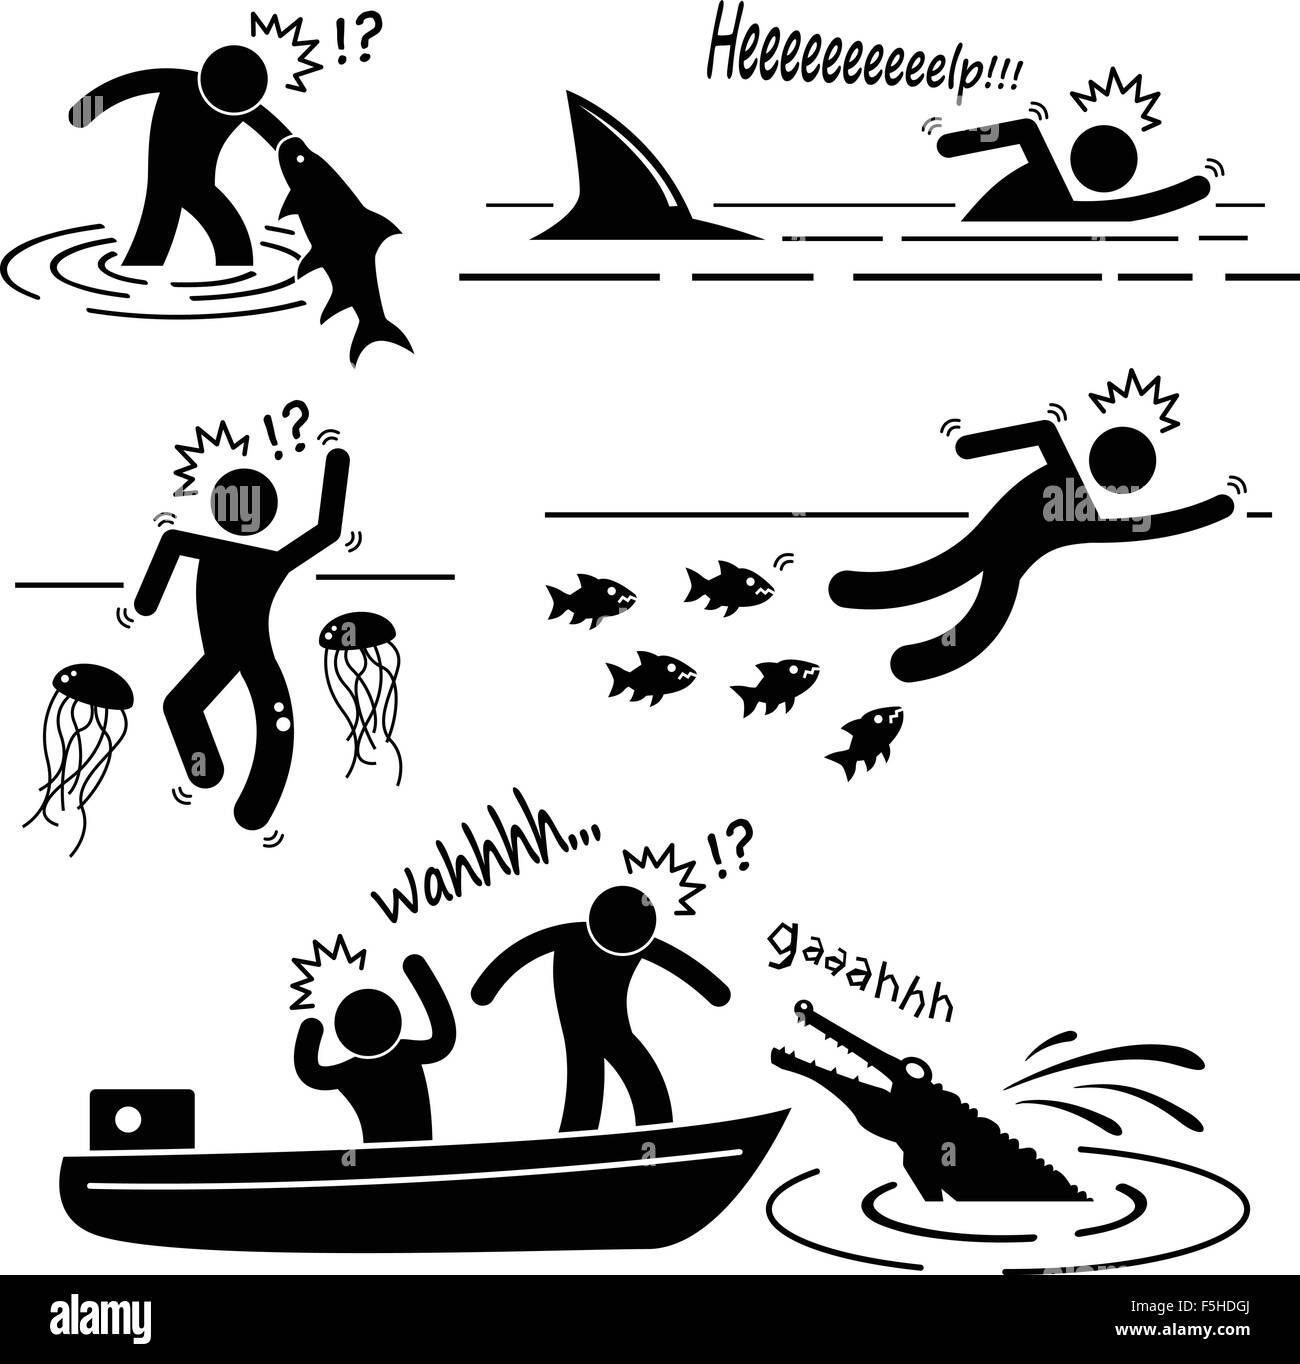 Water Sea River Fish Animal Attacking Hurting Human Stick Figure Pictogram Icon Stock Vector